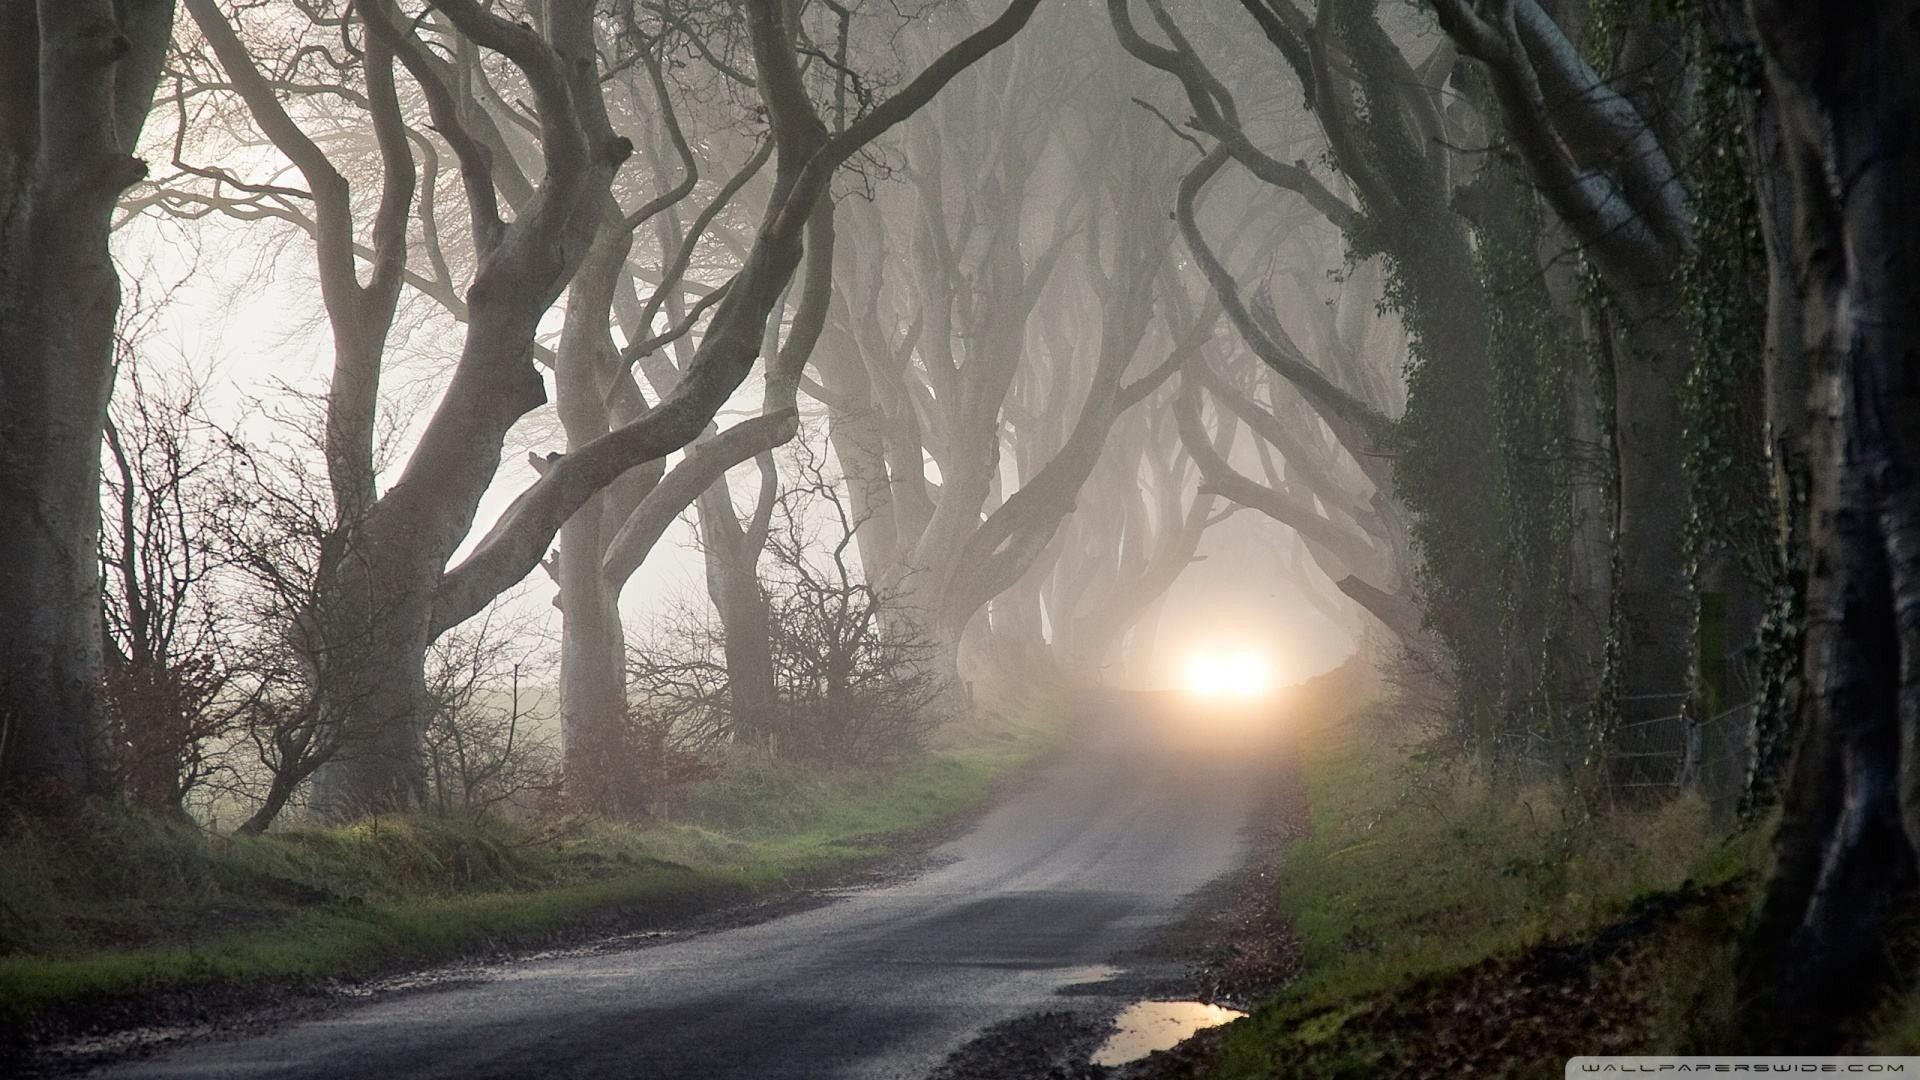 1920x1080, Wallpapers Backgrounds - Haunted Road Background - HD Wallpaper 